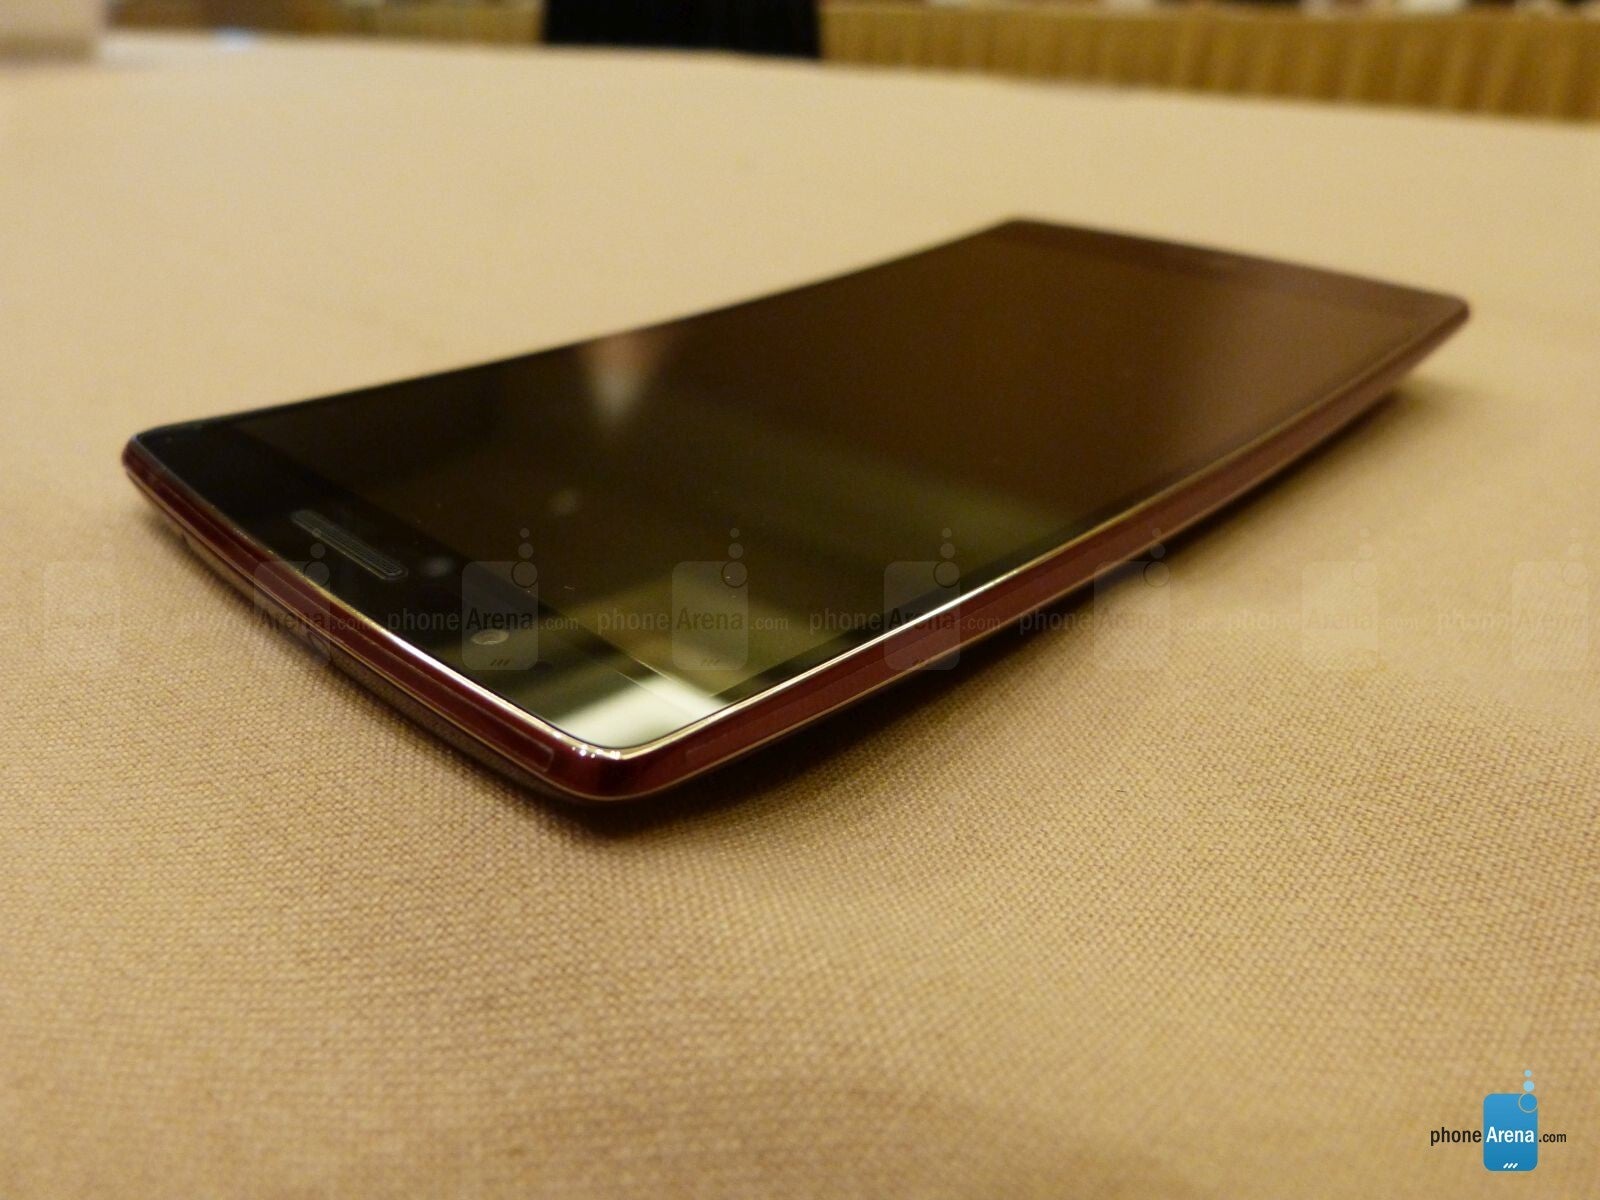 5 ways LG was ahead of the competition and how that didn't matter